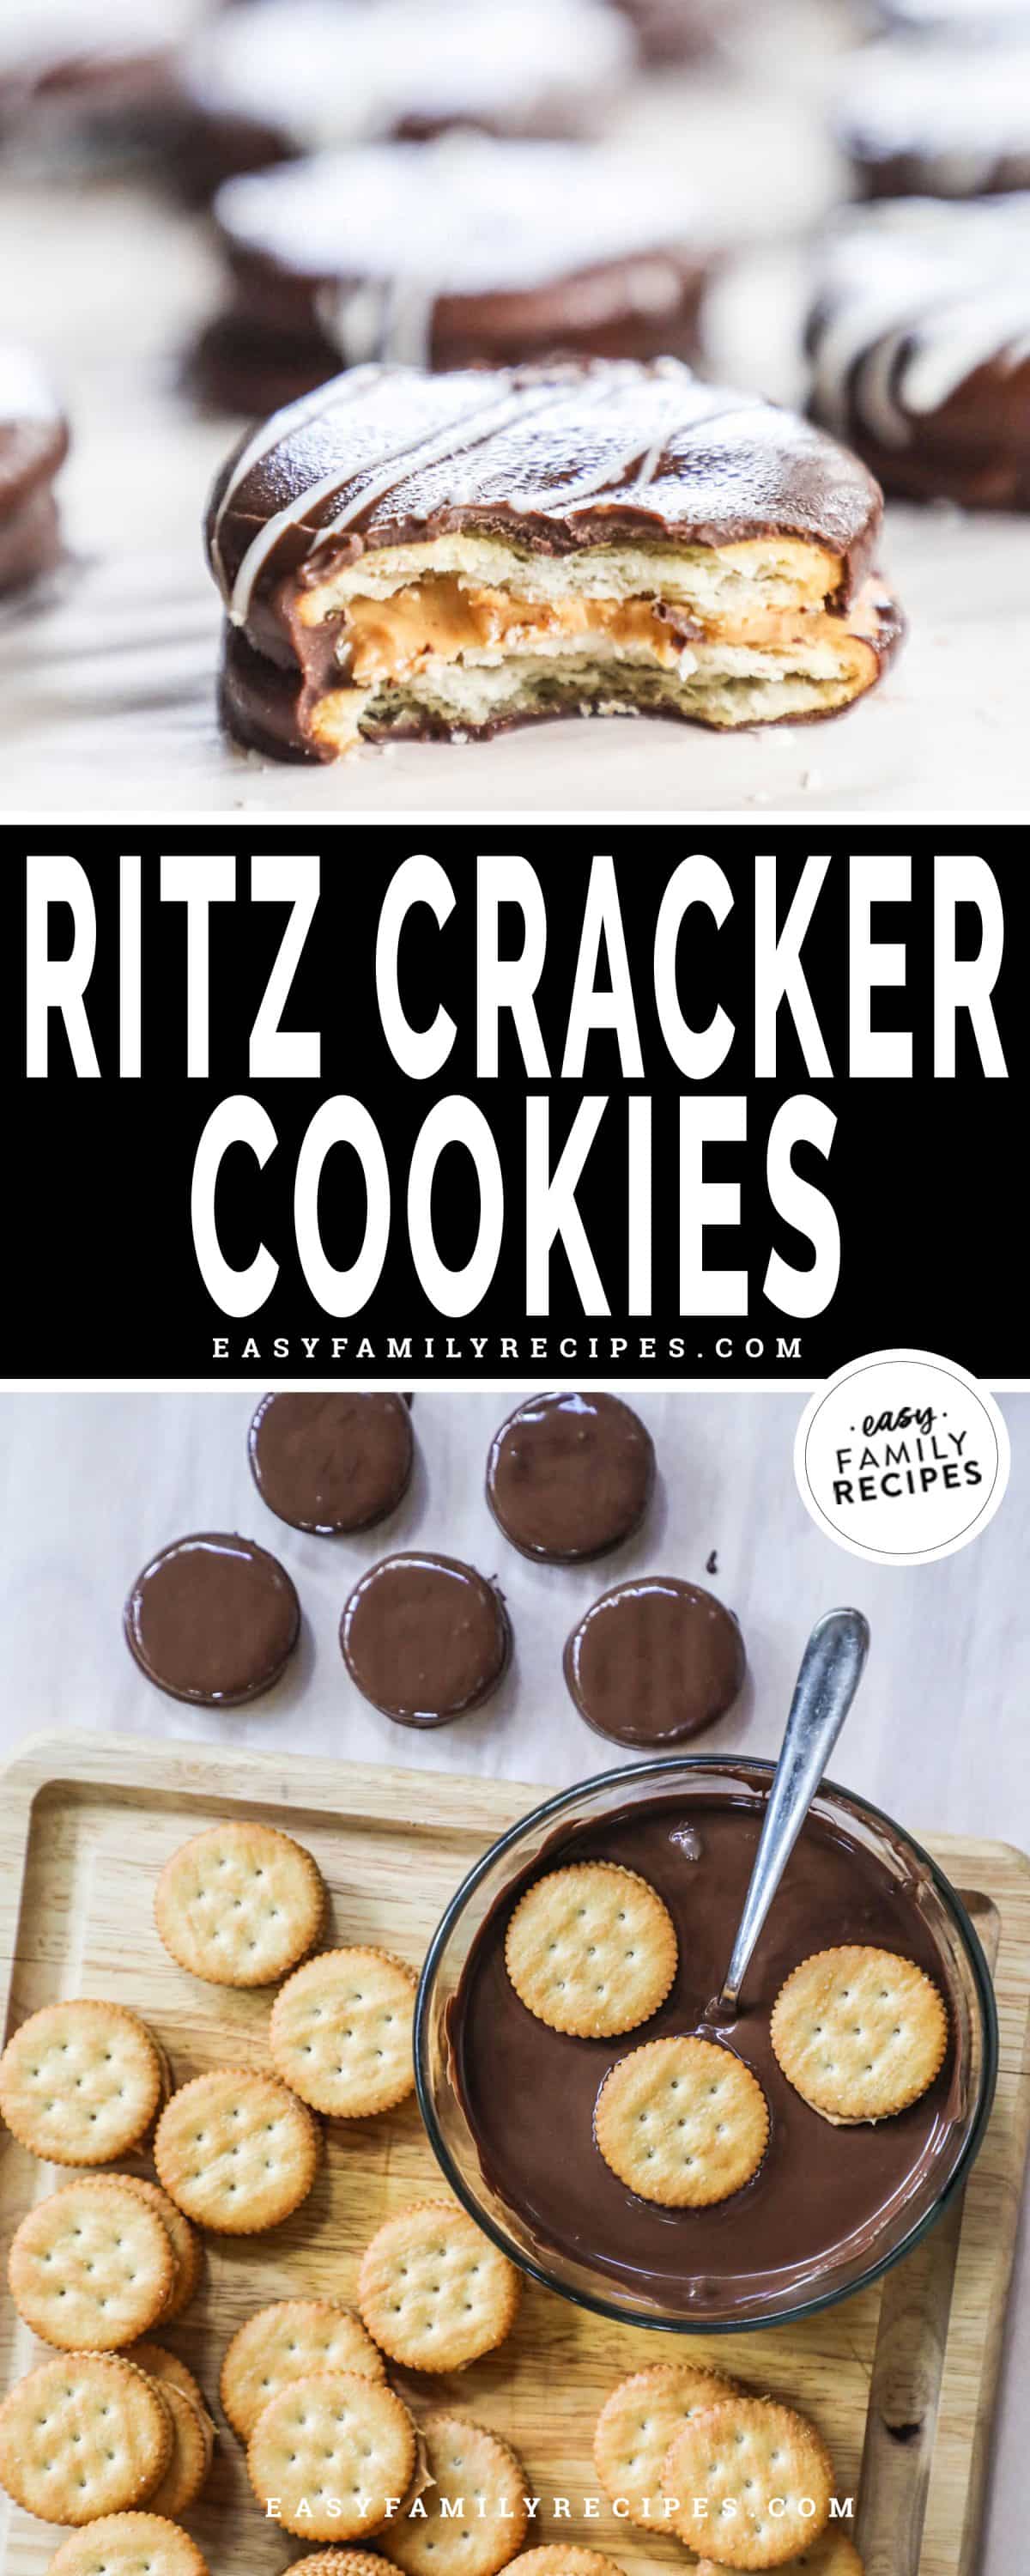 Image collage with ritz crackers filled with peanut butter being dipped in chocolate and another one with a bite taken out to show the layers.